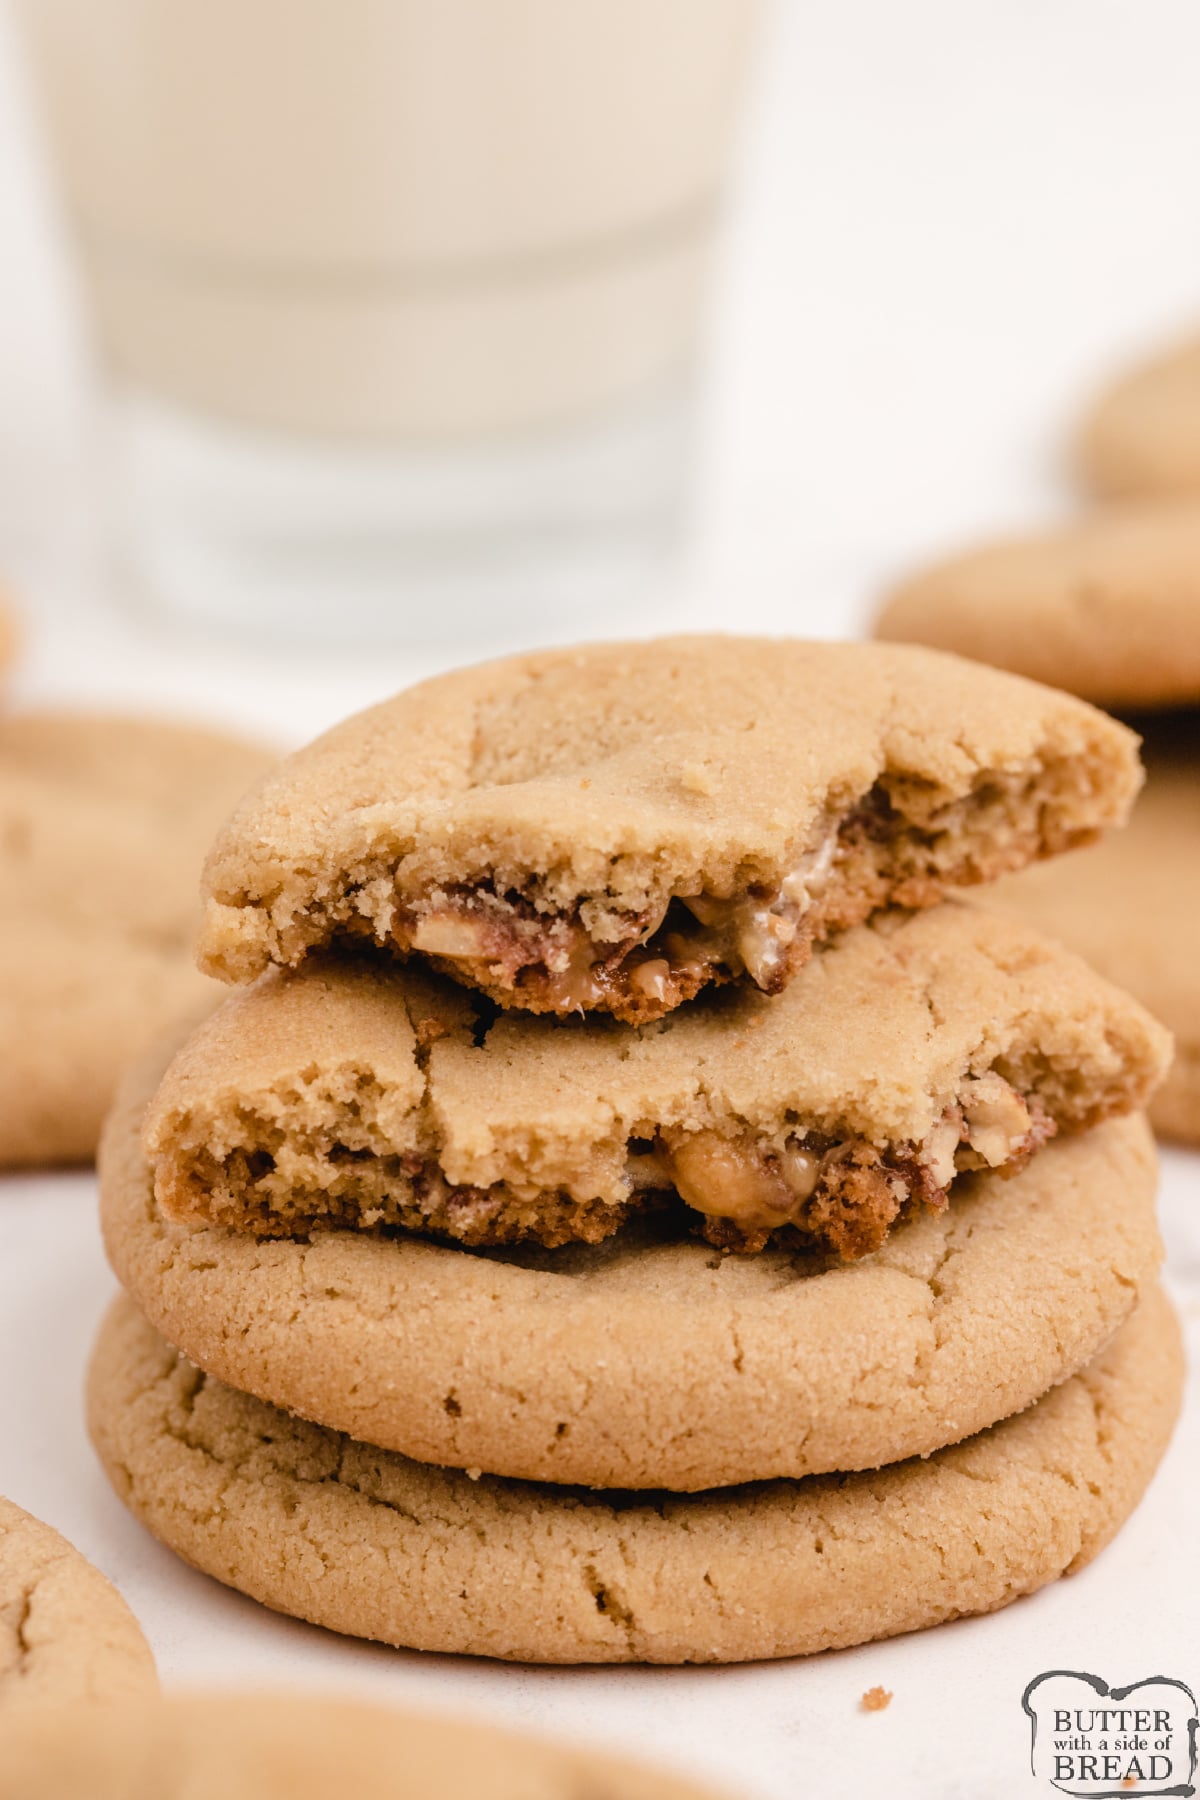 Snickers Peanut Butter Cookies start with an incredible soft and delicious peanut butter cookie recipe, and add a Snickers surprise in the middle!